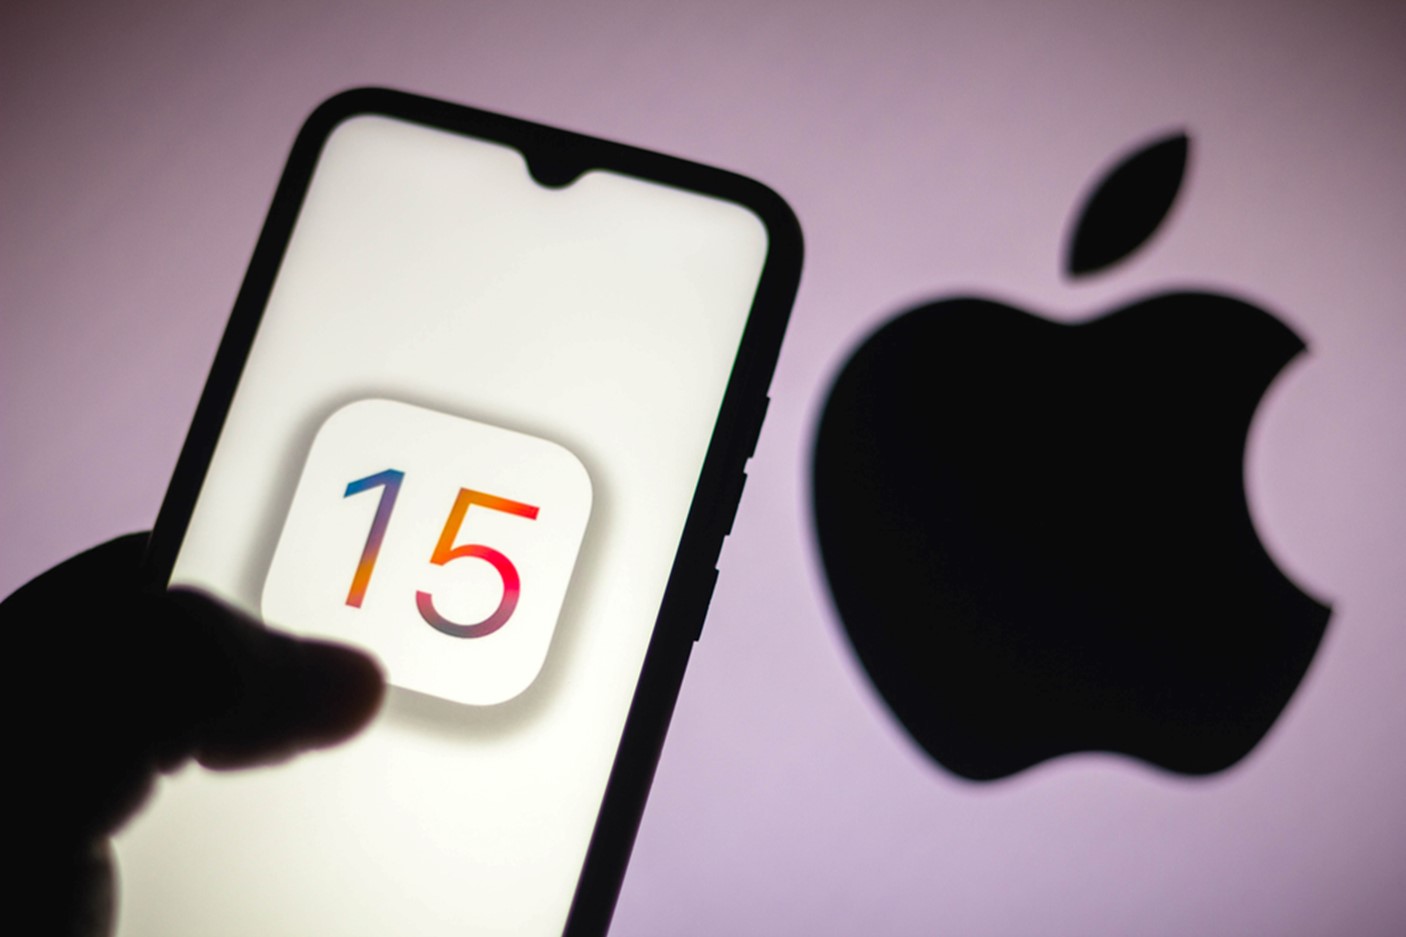 Ways Focus Mode for iOS 15 Can Help You Stay Organized